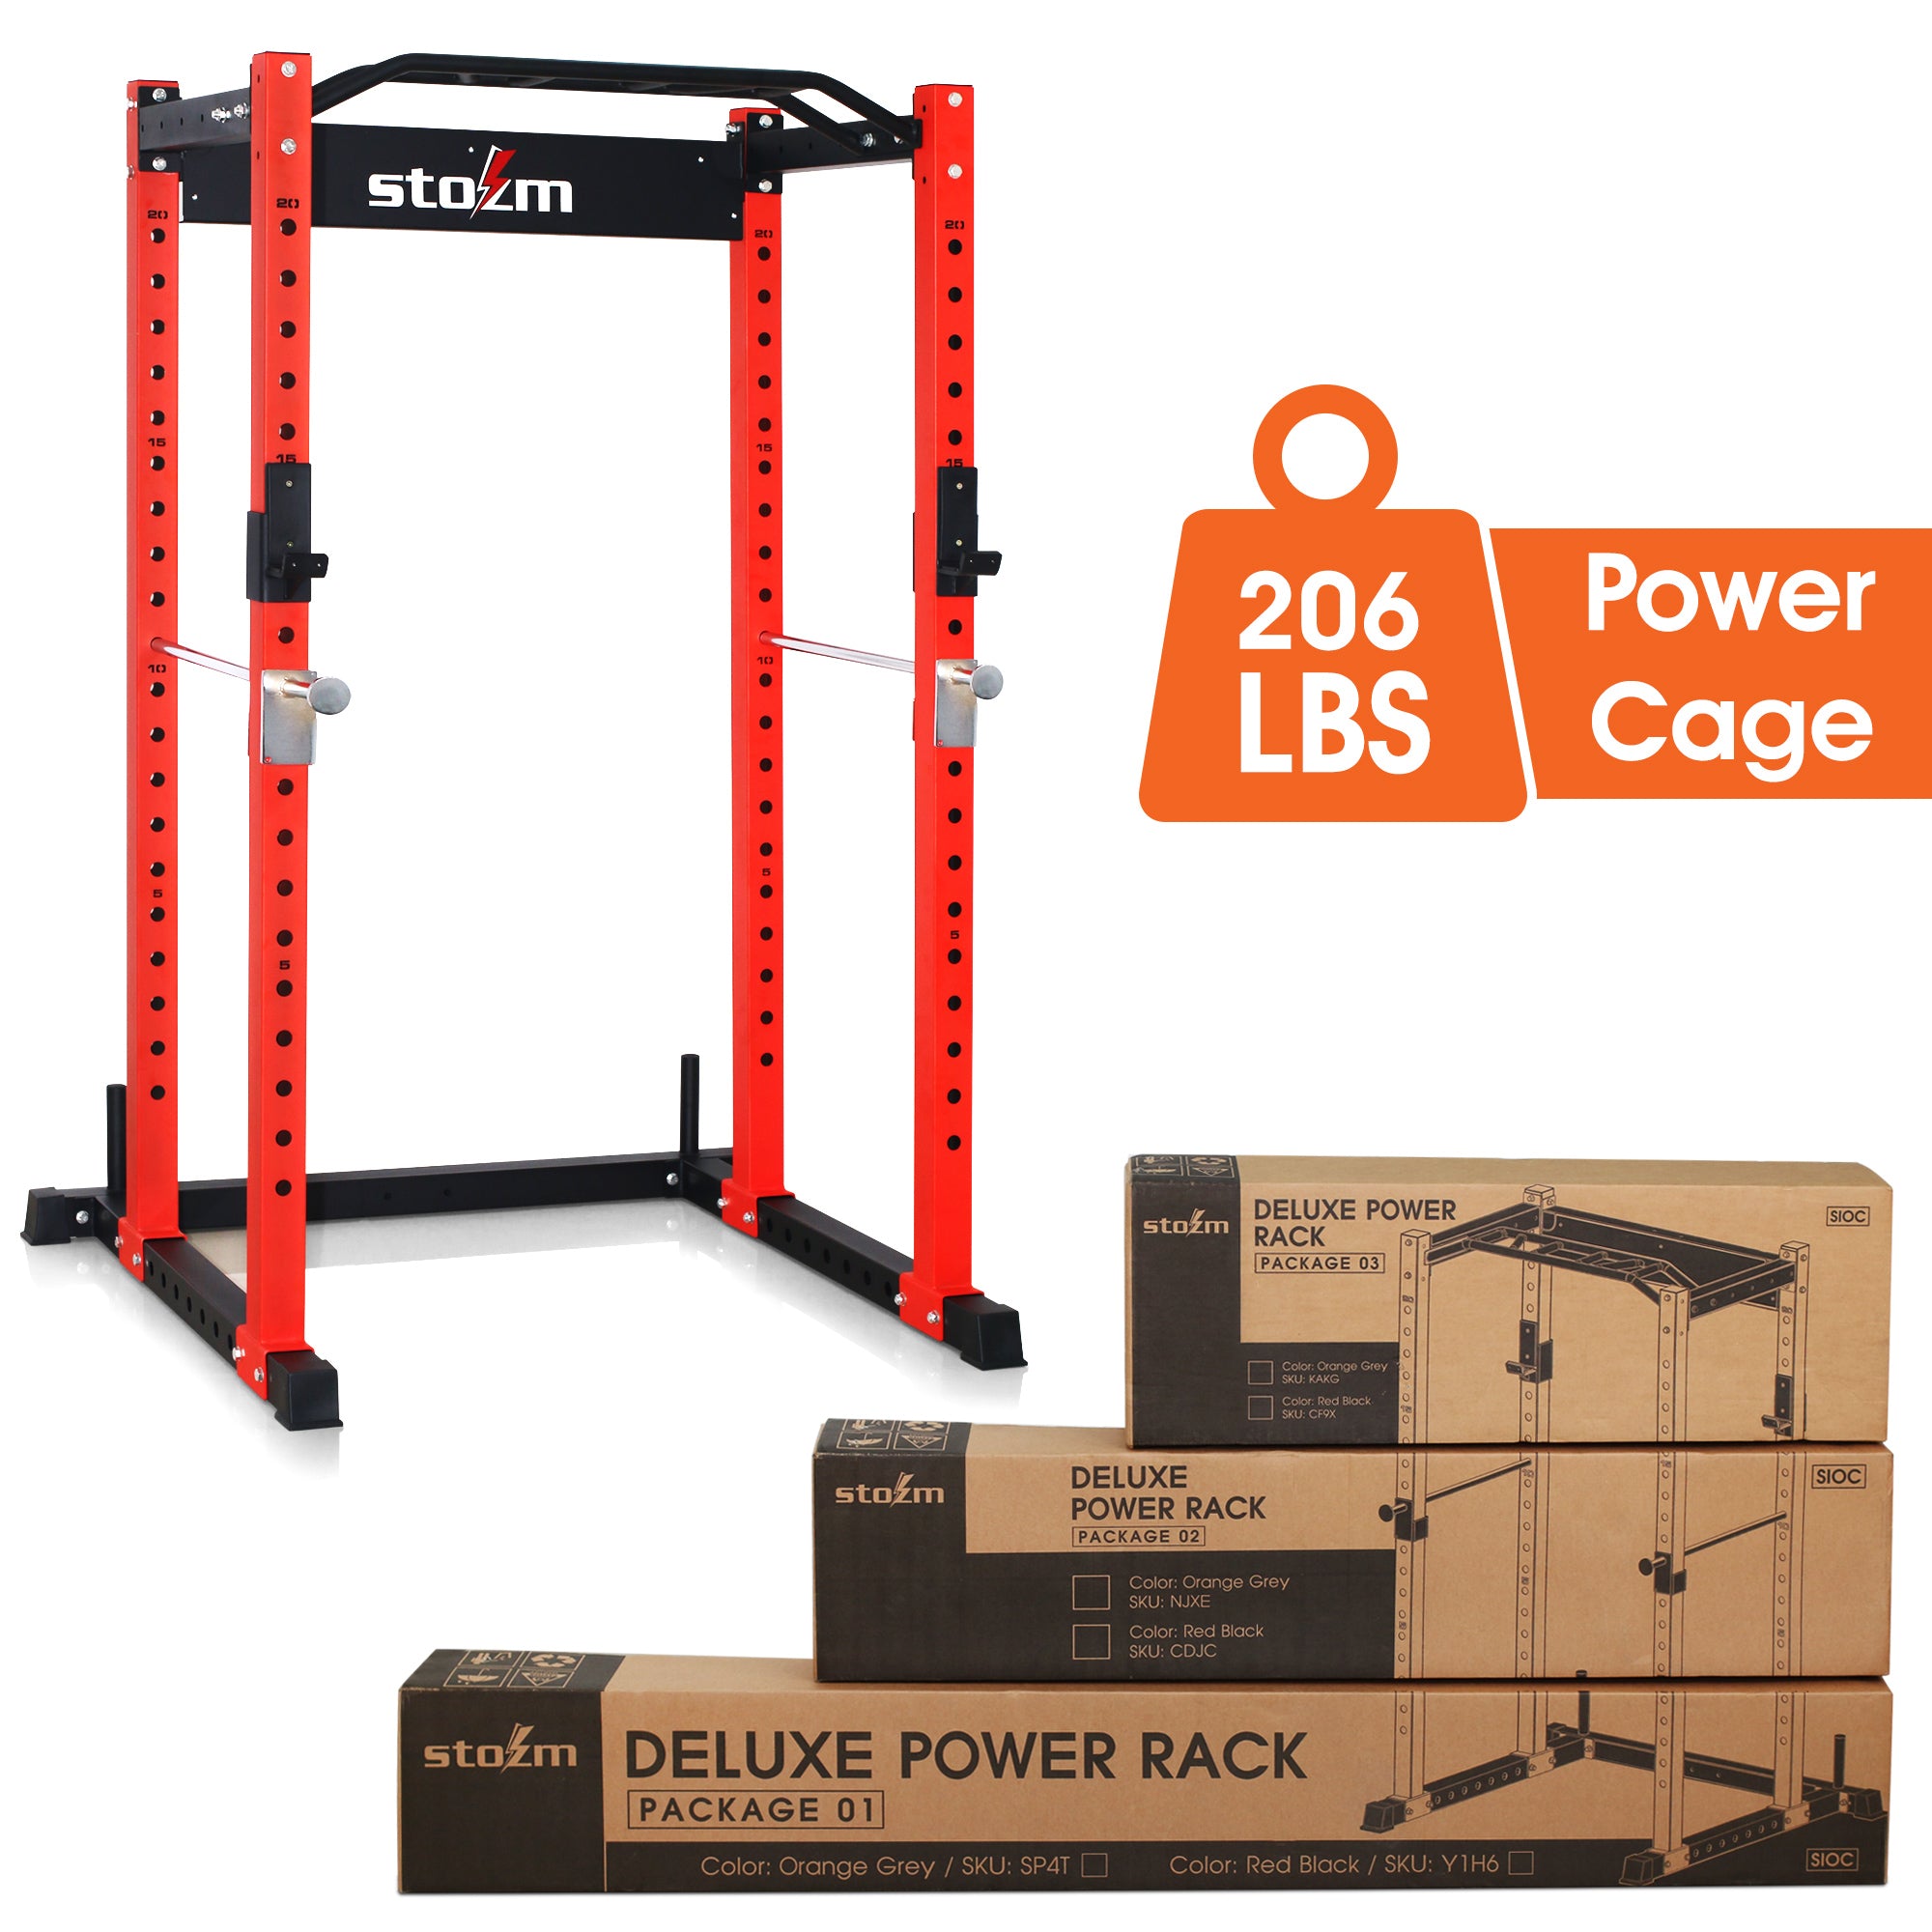 STOZM 3”x3” Multi-Functional Power Cage Rack Supports 1600lbs and LAT